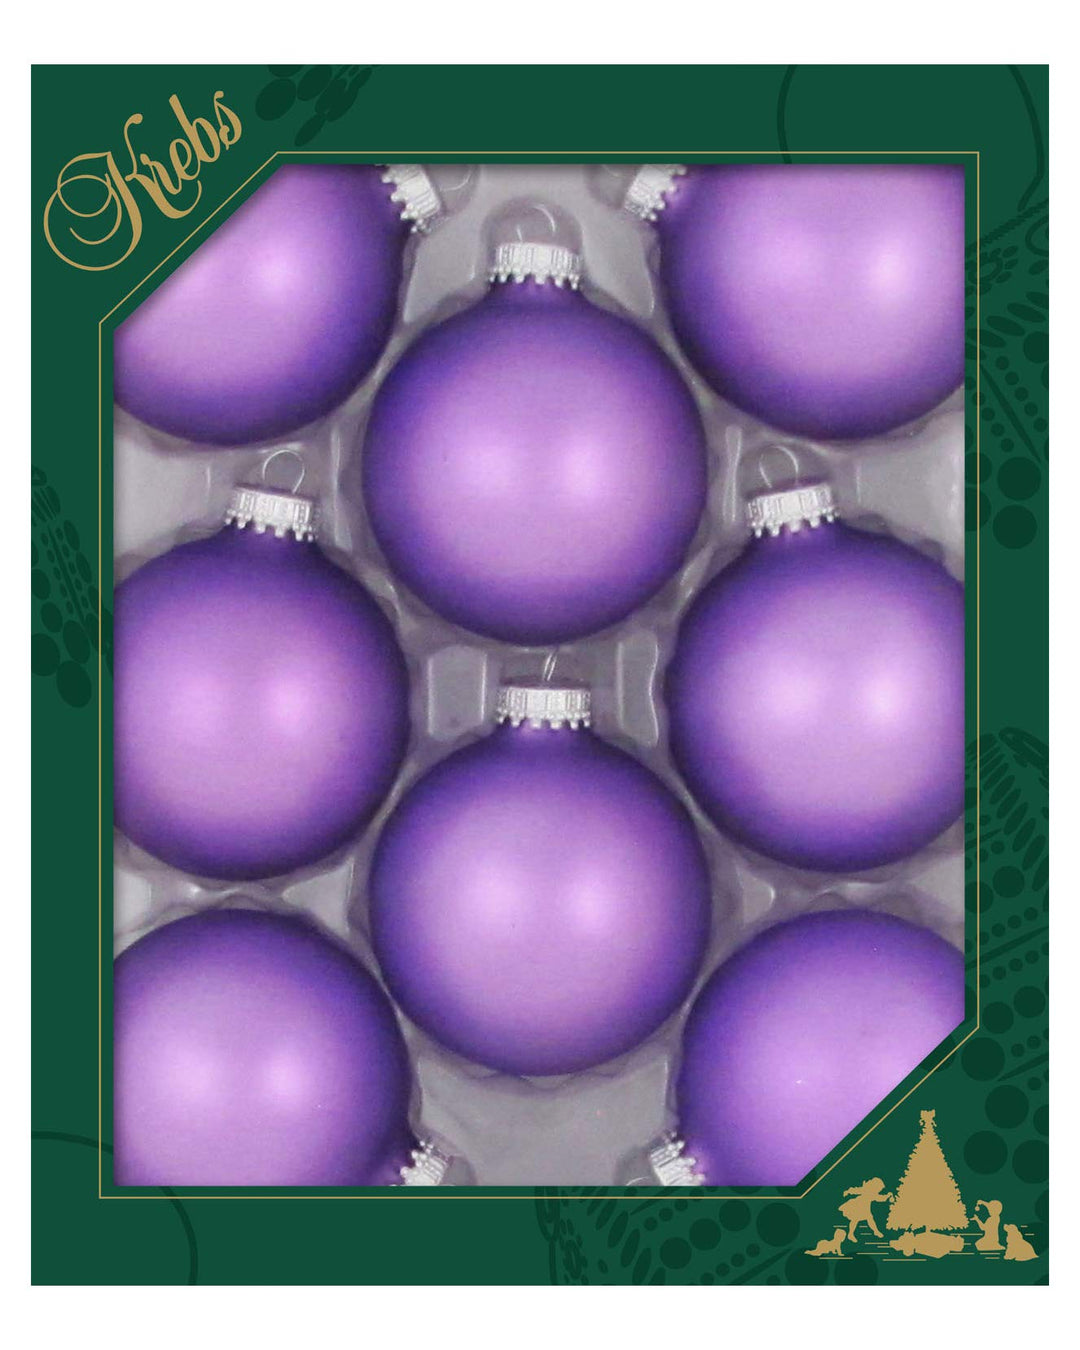 Glass Christmas Tree Ornaments - 67mm / 2.63" [8 Pieces] Designer Balls from Christmas By Krebs Seamless Hanging Holiday Decor (Velvet Amethyst Purple)